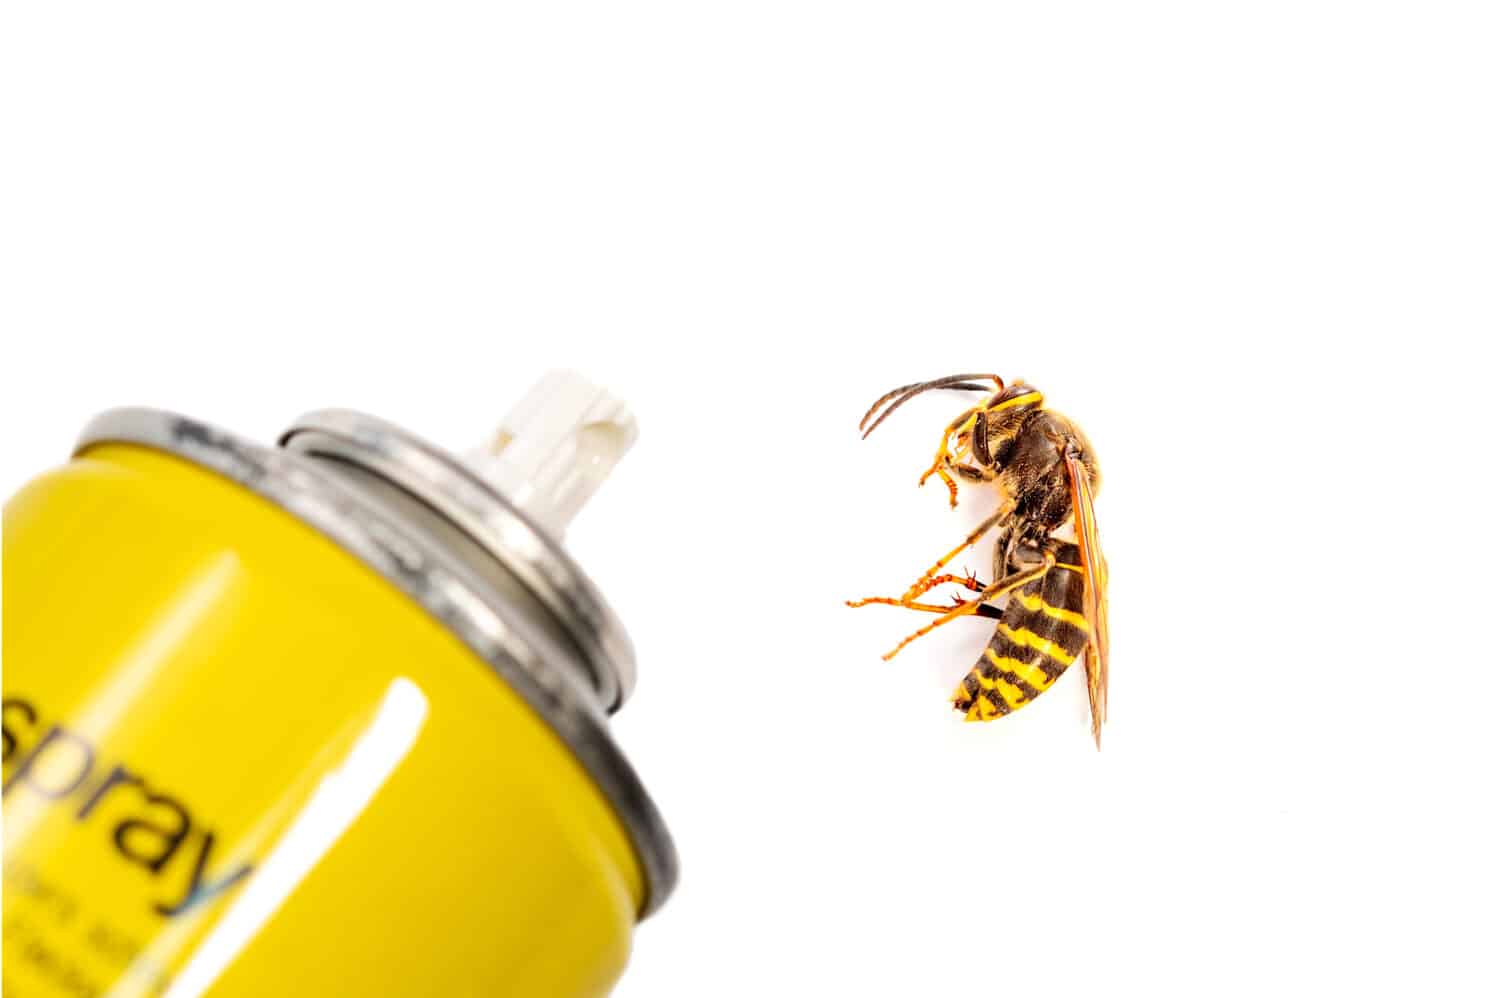 bottle Aerosol for the control of insects and a wasp isolated on white background in detail. 